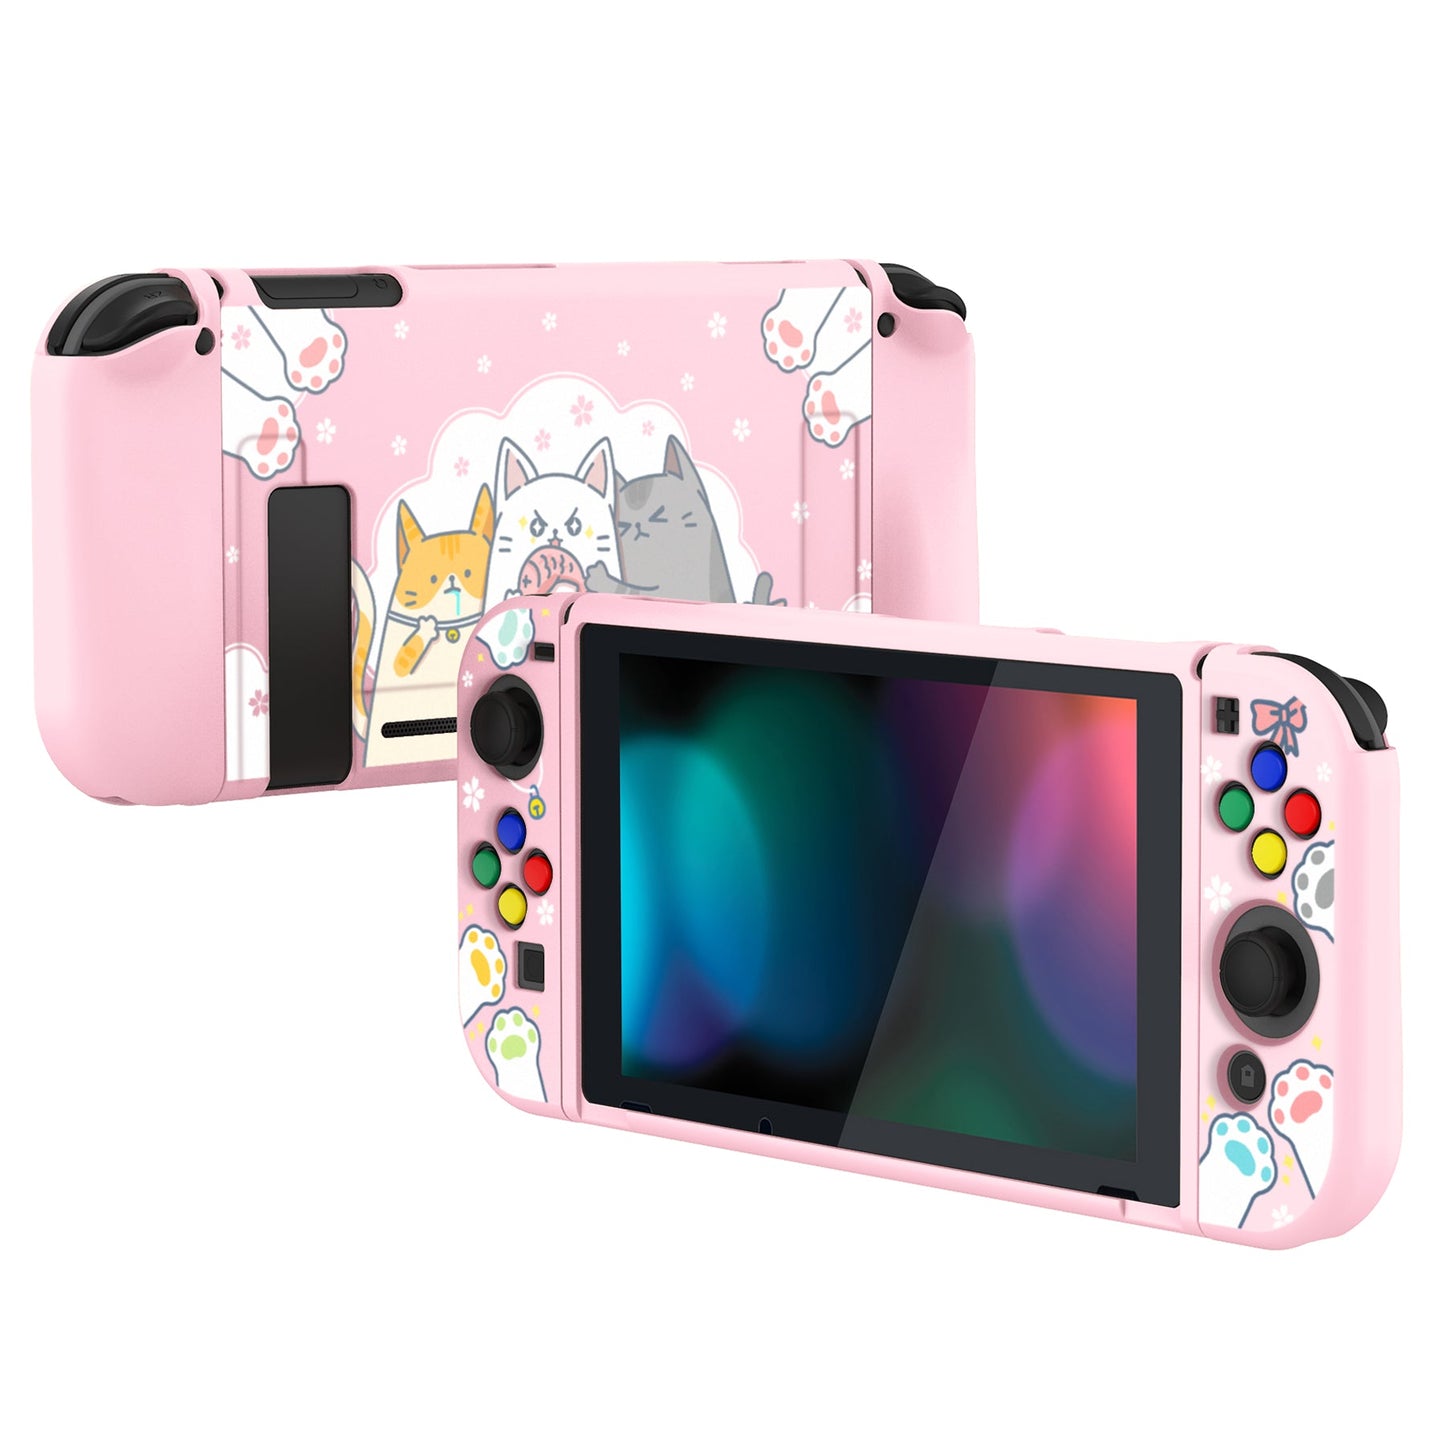 PlayVital Hungry Kitties Protective Case for NS, Soft TPU Slim Case Cover for NS Joycon Console with Colorful ABXY Direction Button Caps - NTU6020 PlayVital